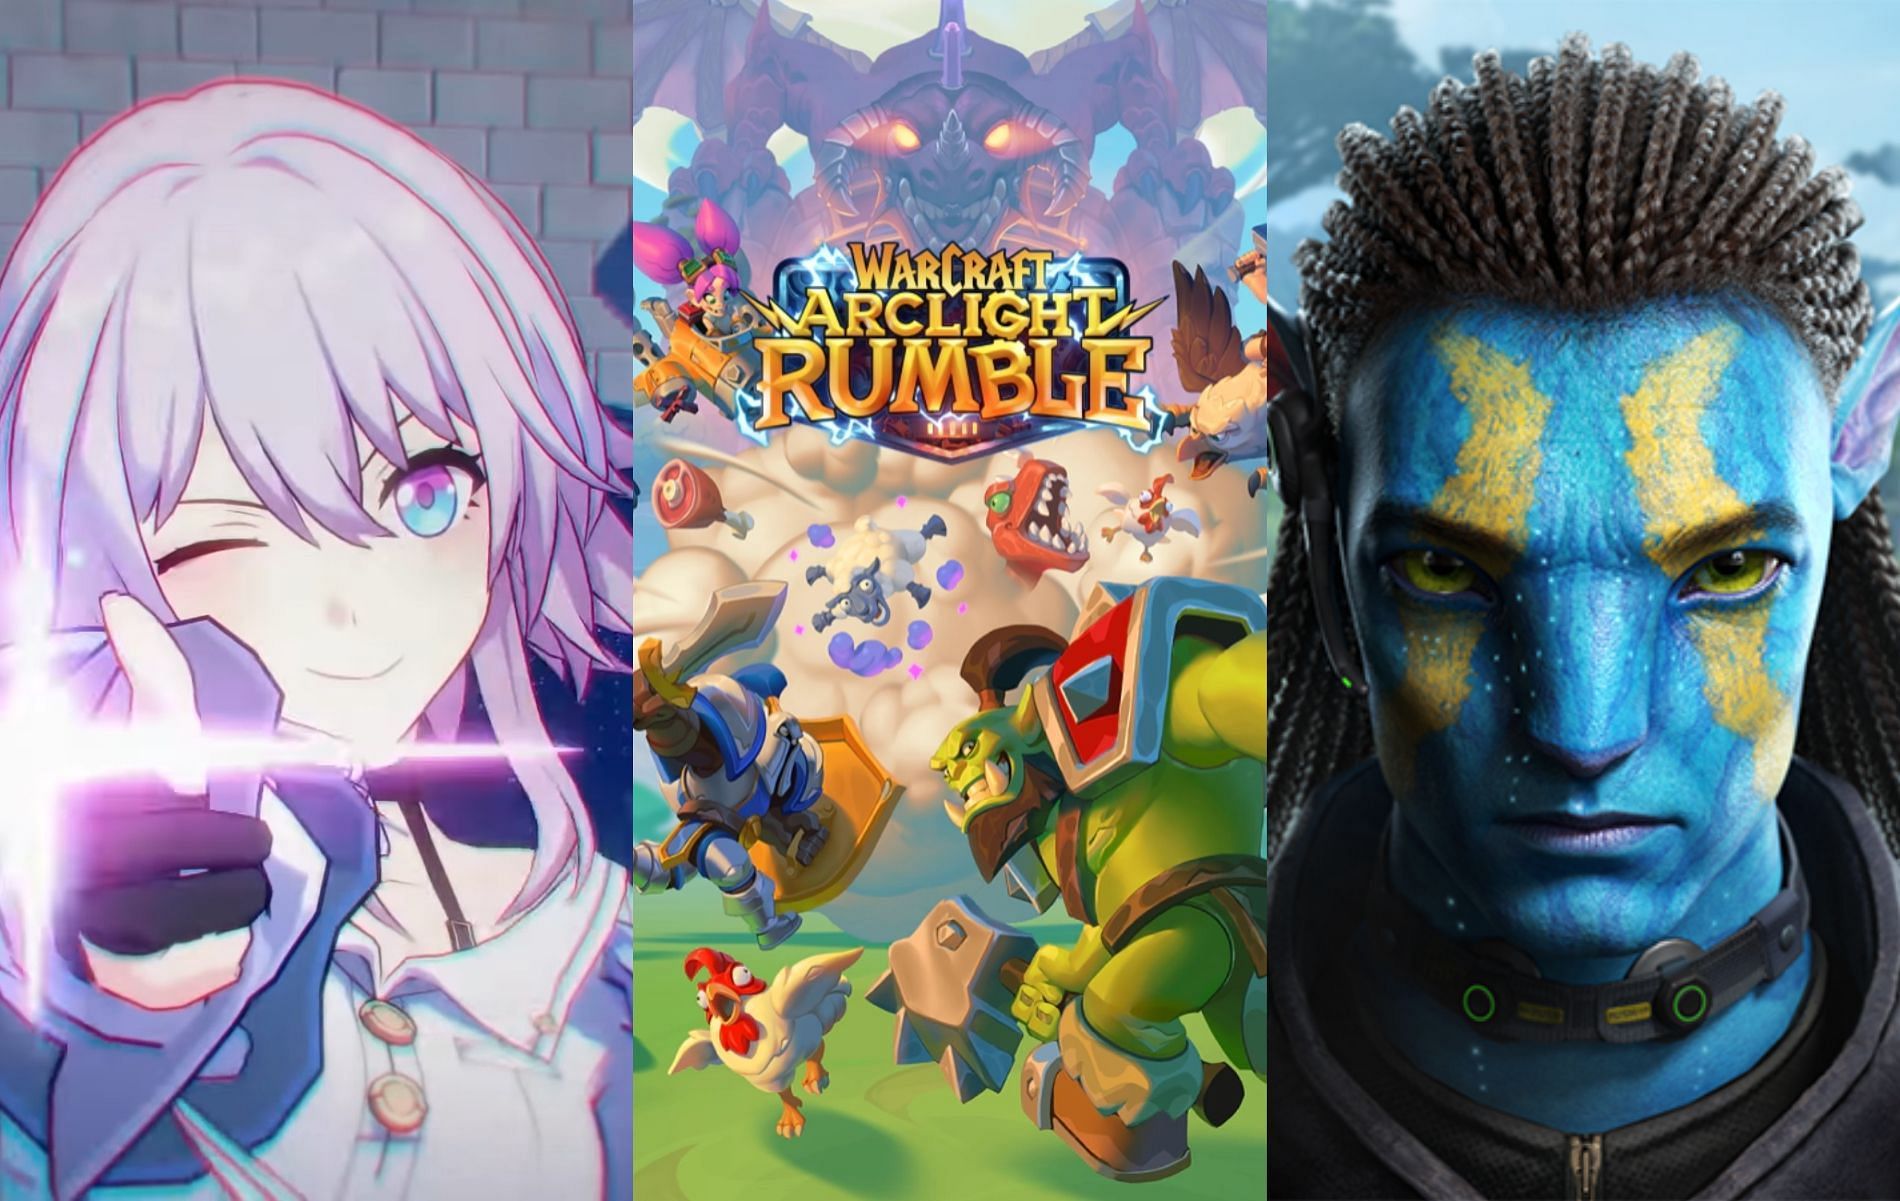 Read below to know about some of the most-awaited RPG titles in the mobile gaming platform that simply cannot be missed (Images via MiHoYo, Blizzard Entertainment and Archosaur Games)